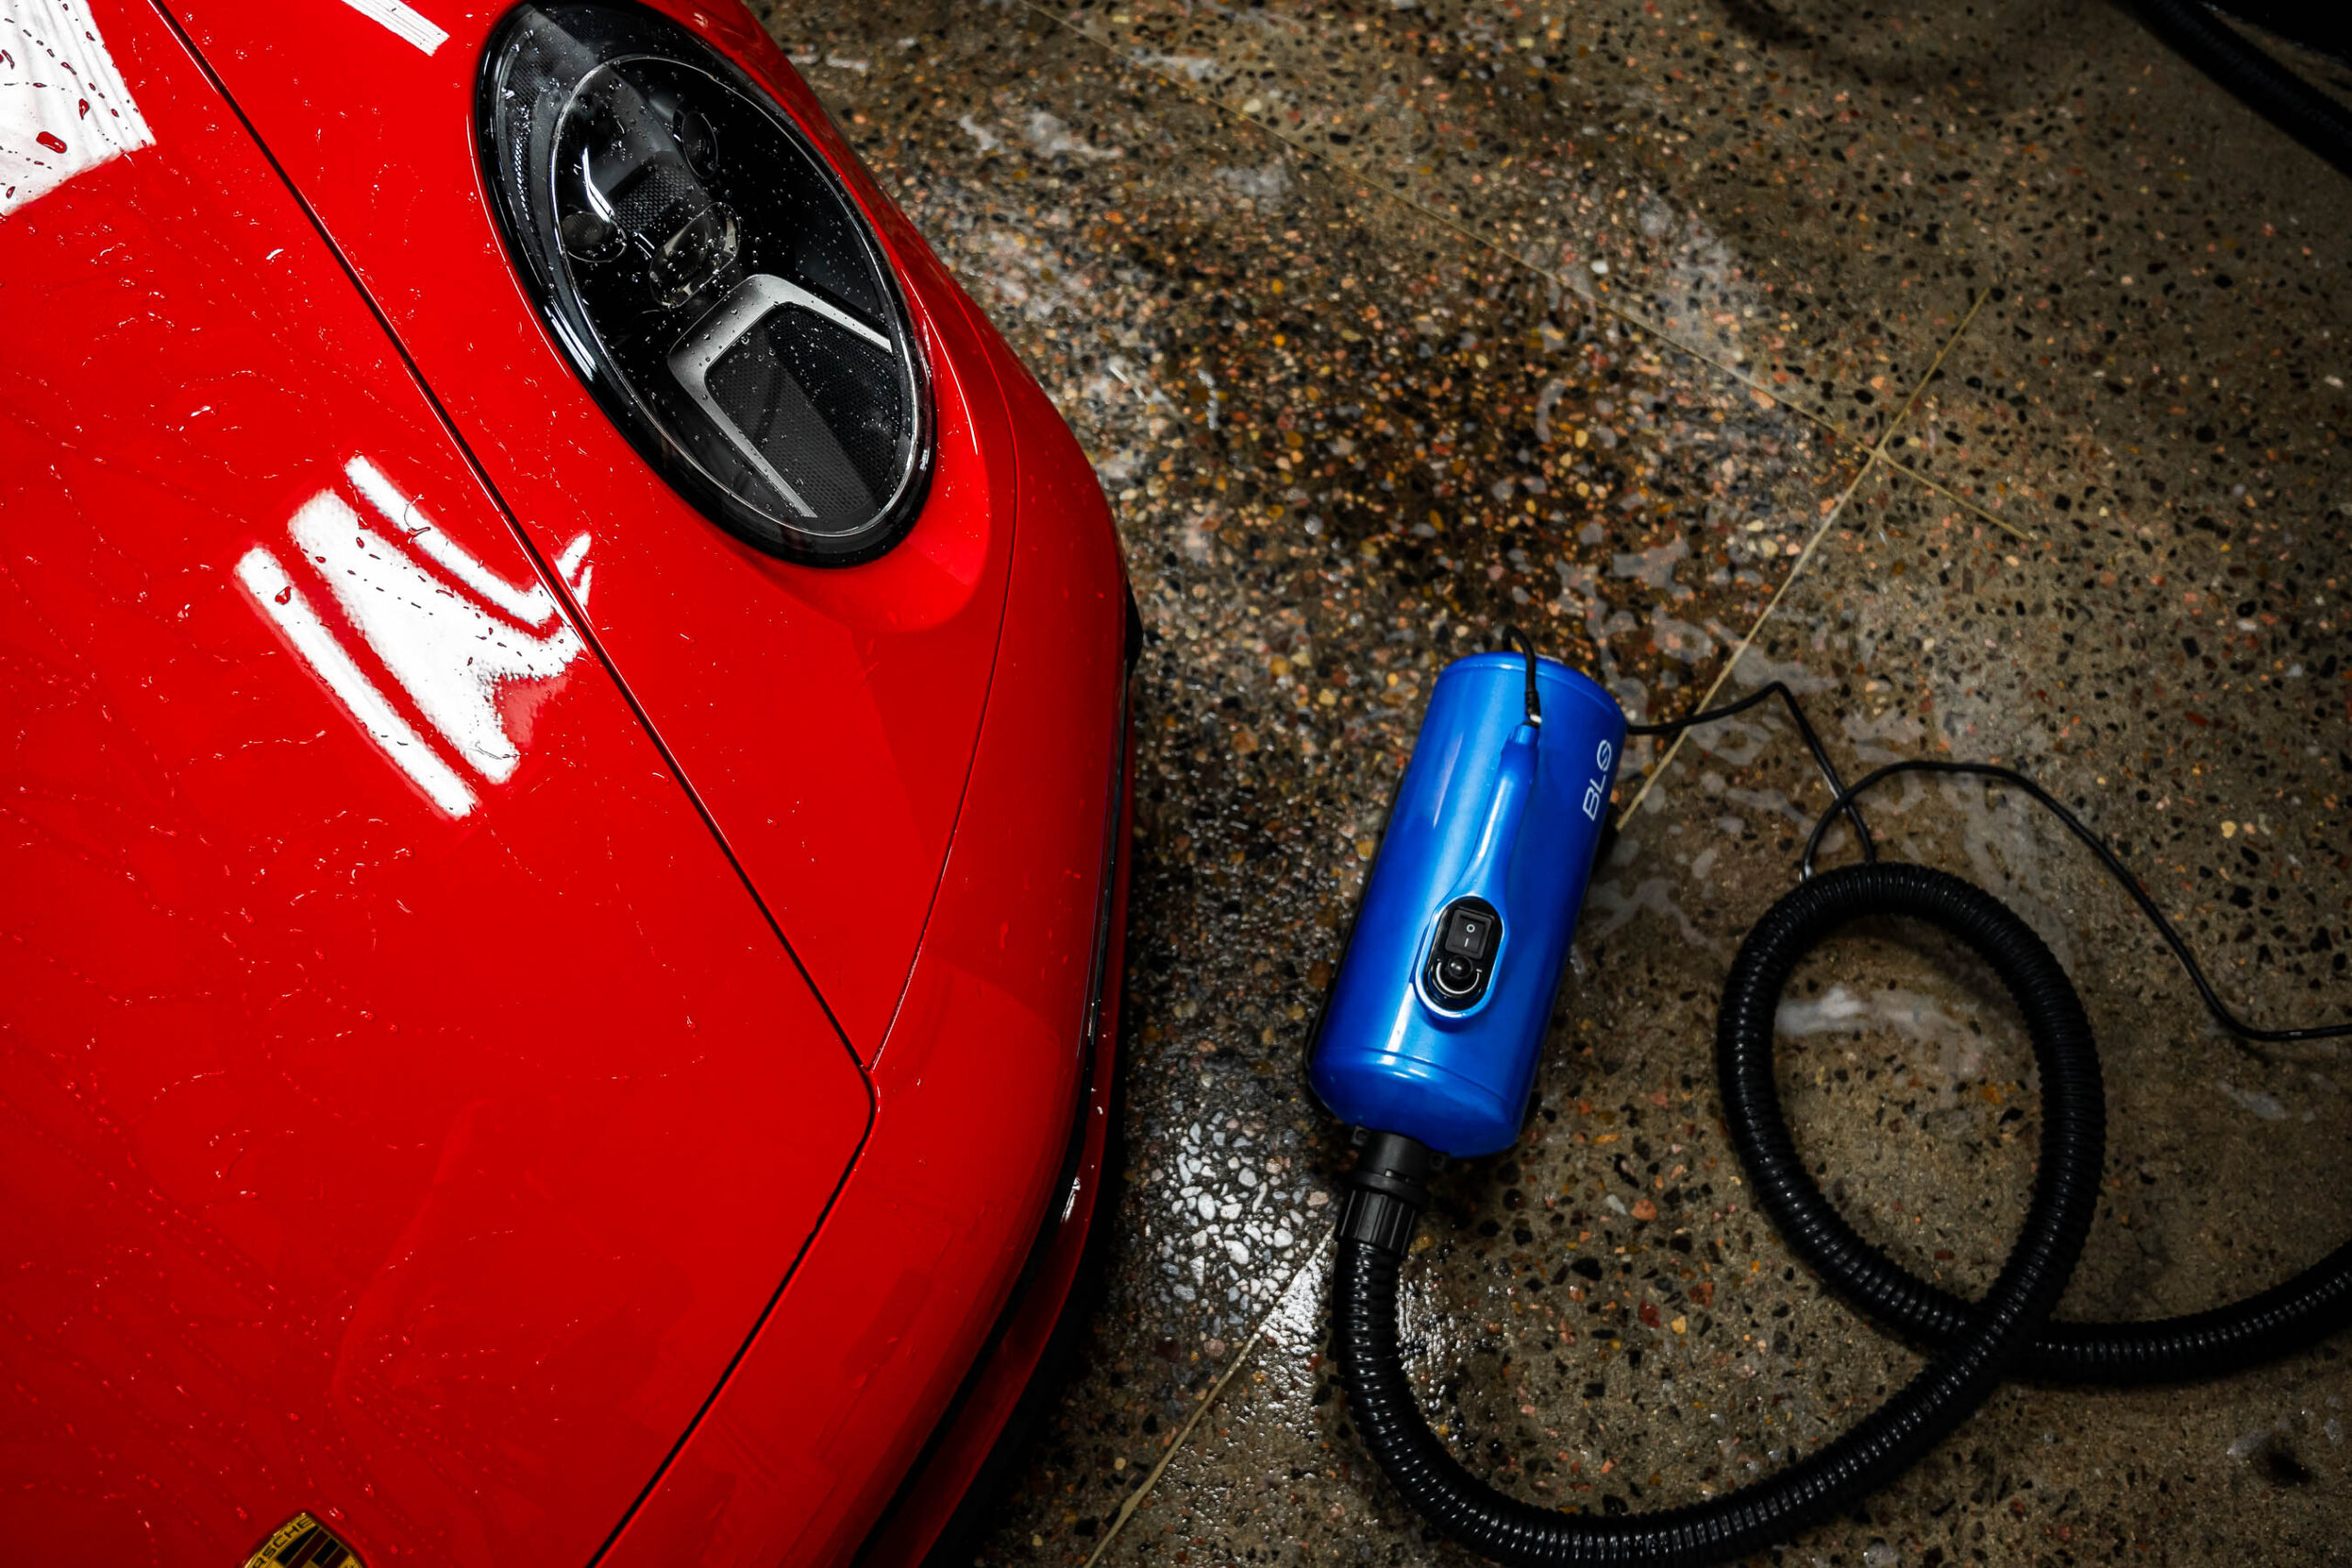 Using a BLO Car Dryer to touchlessly dry vehicle